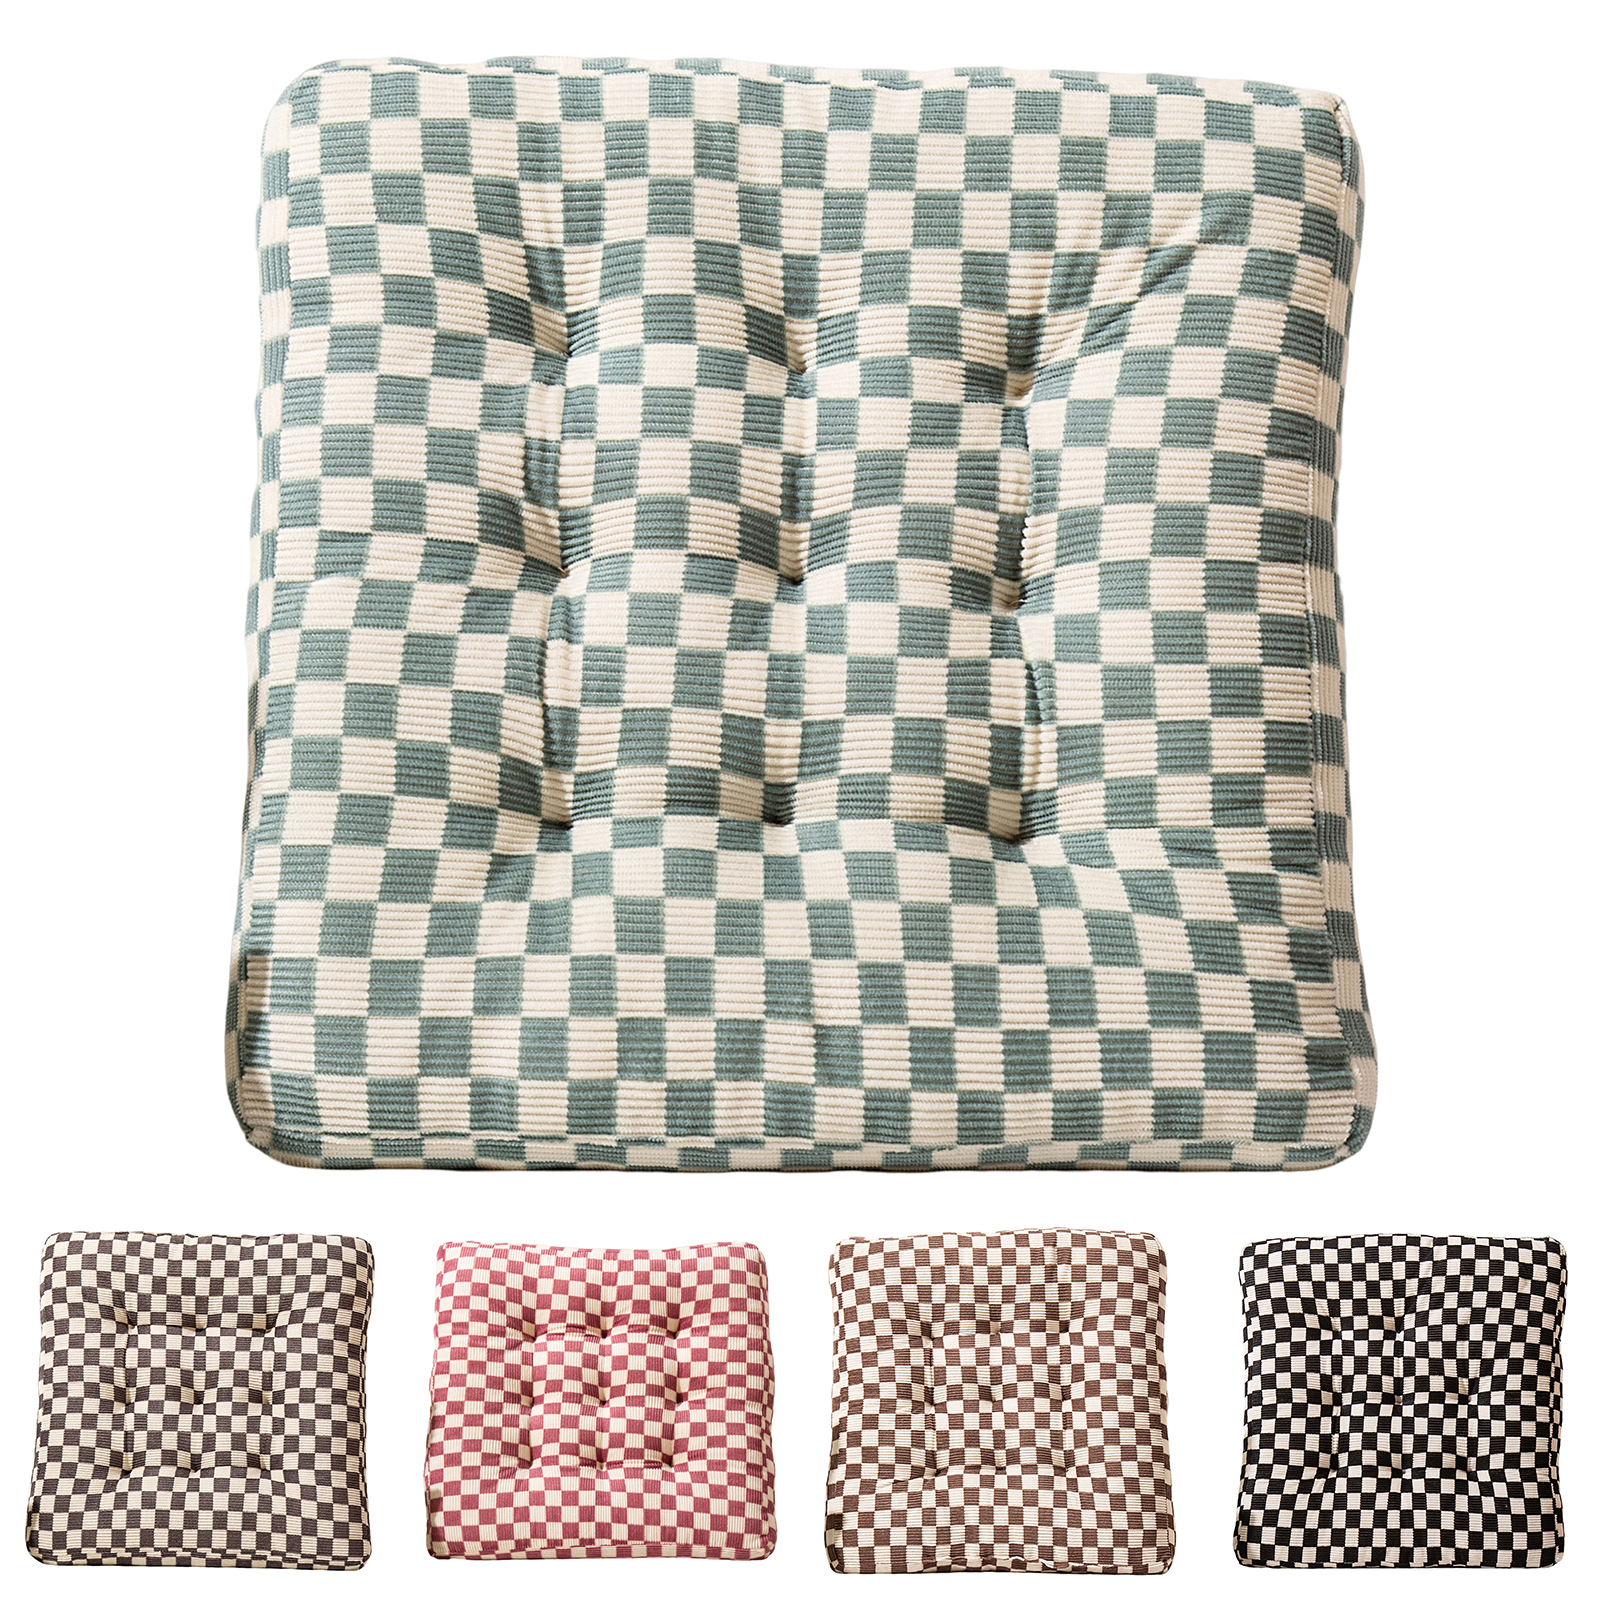 Cheers.US Seat Cushion, Chair Cushion, Comfort Chair Pads, Chair Mat for Indoor, Outdoor Dining Chair, Office Chair, Desk Chair - image 1 of 7